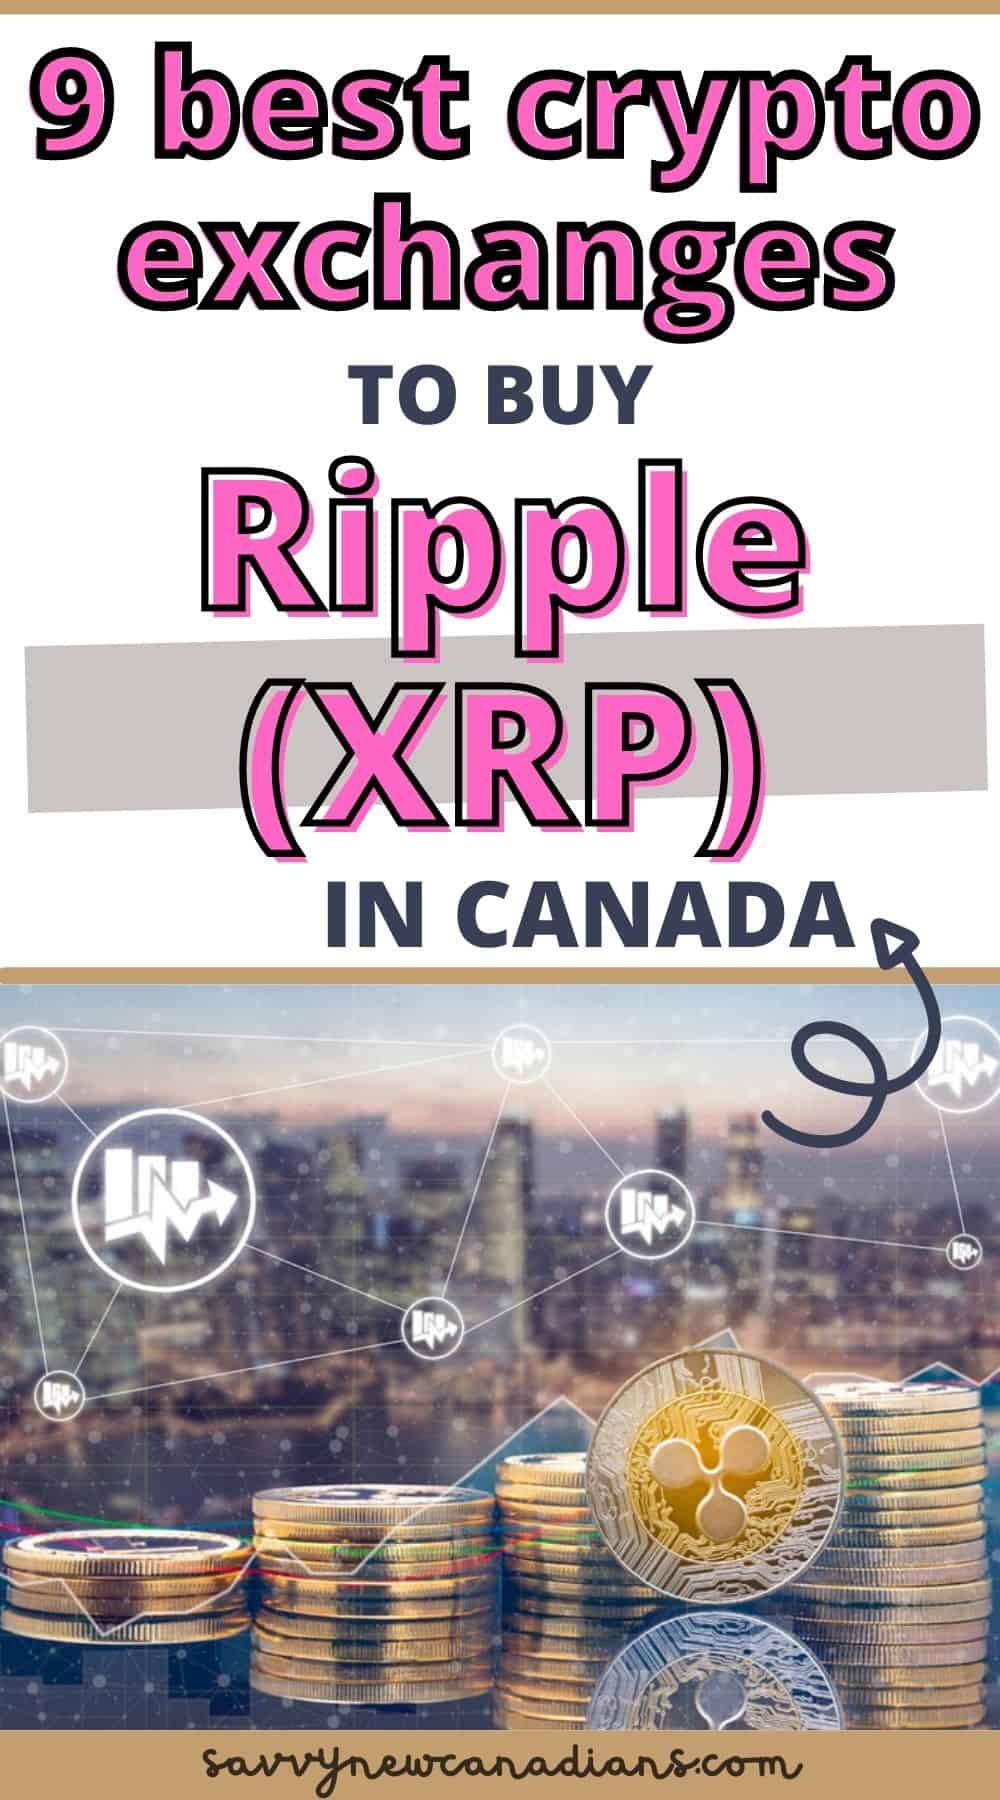 How to buy ripple cryptocurrency in canada avesta crypto